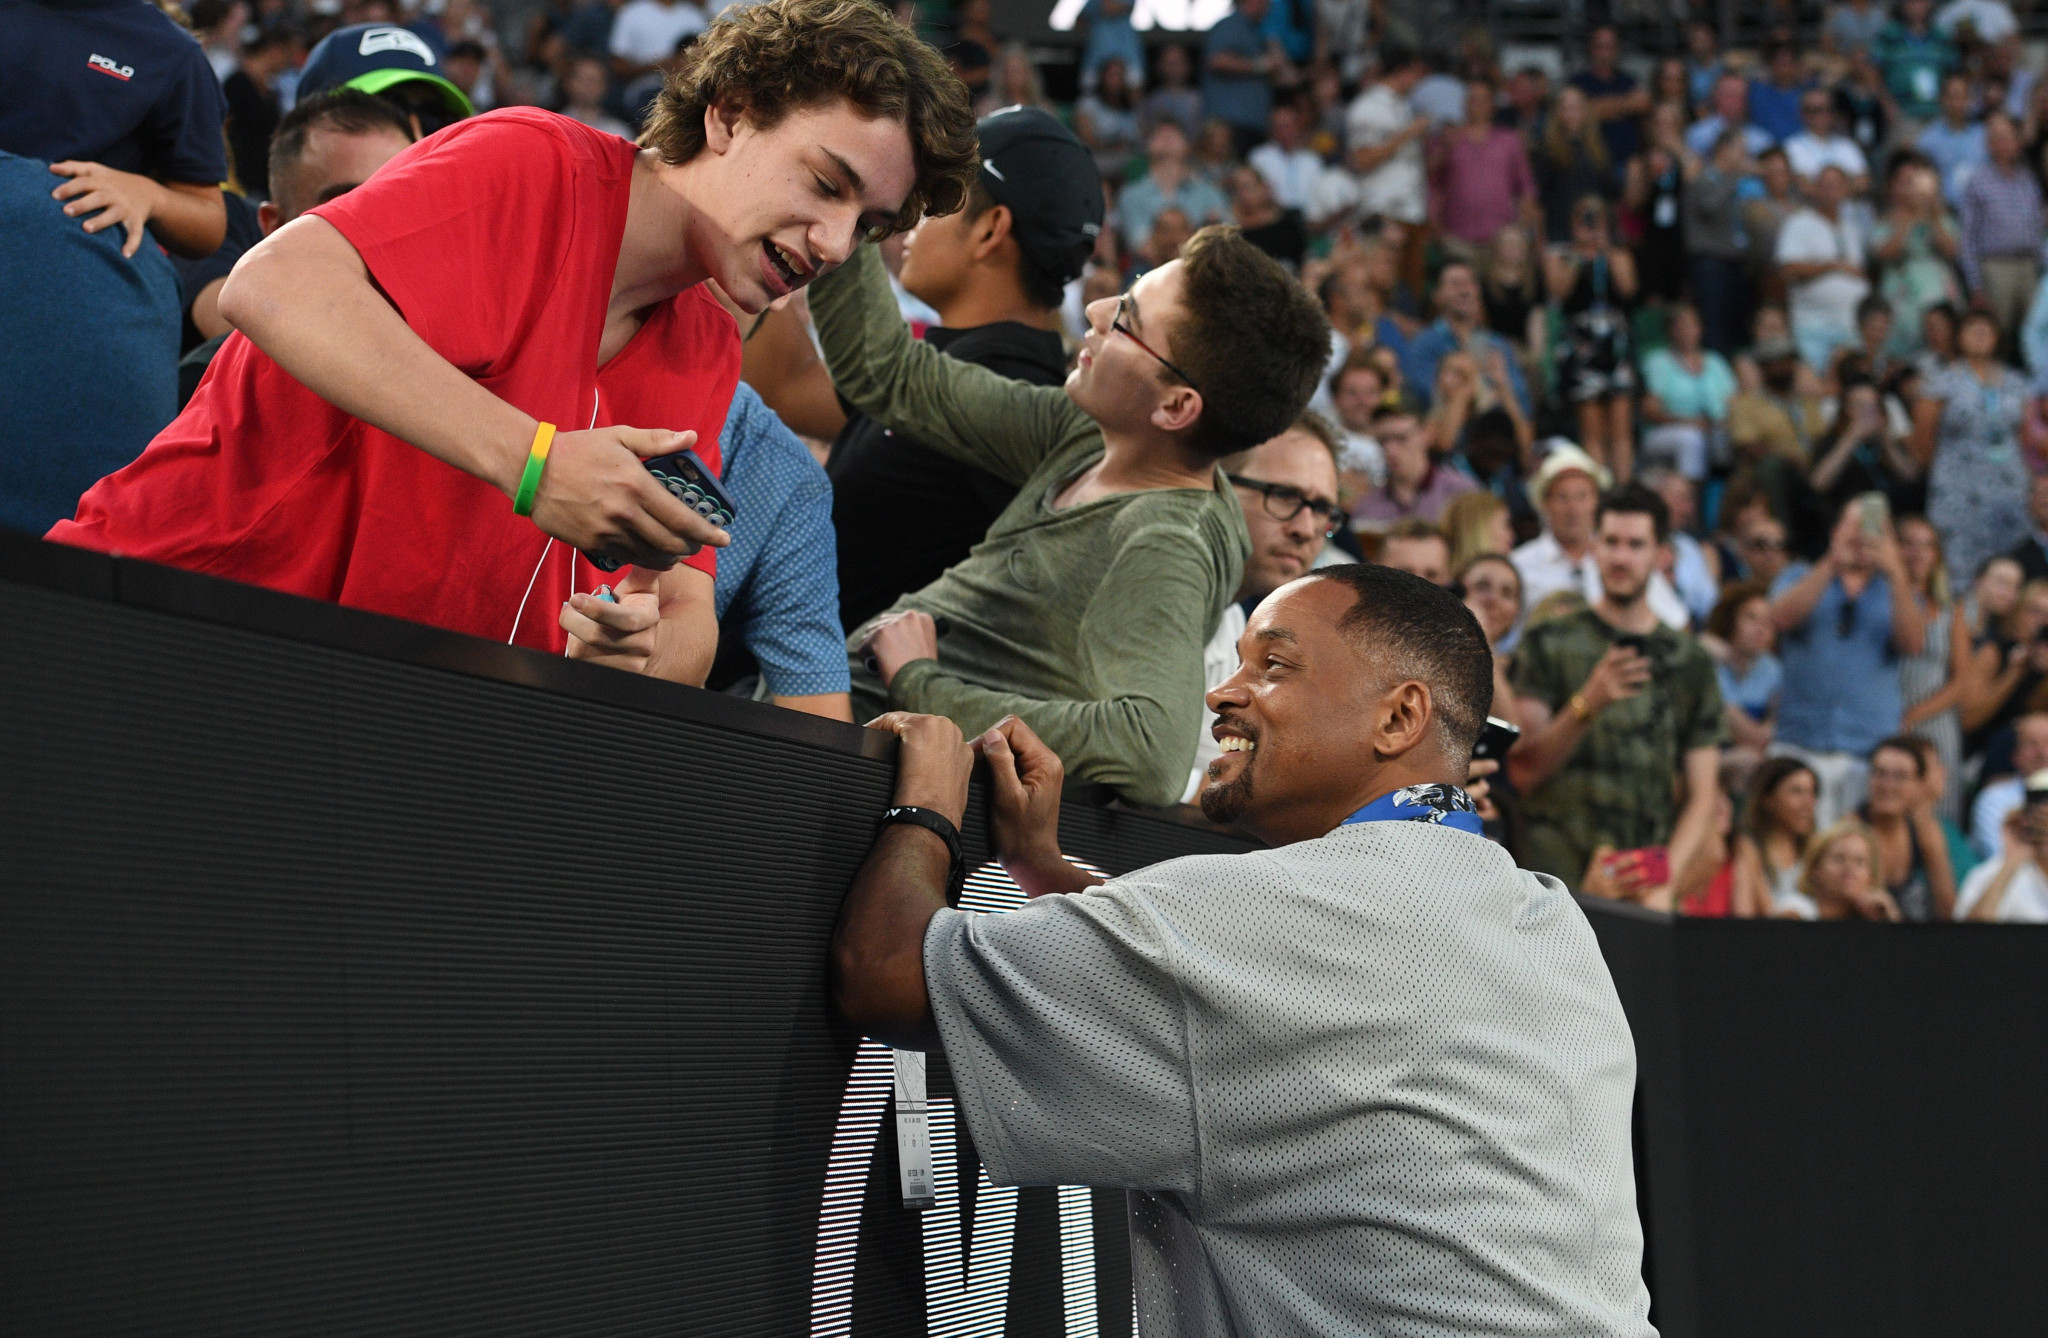 Will Smith speaks with spectators during the matches today ©Getty Images